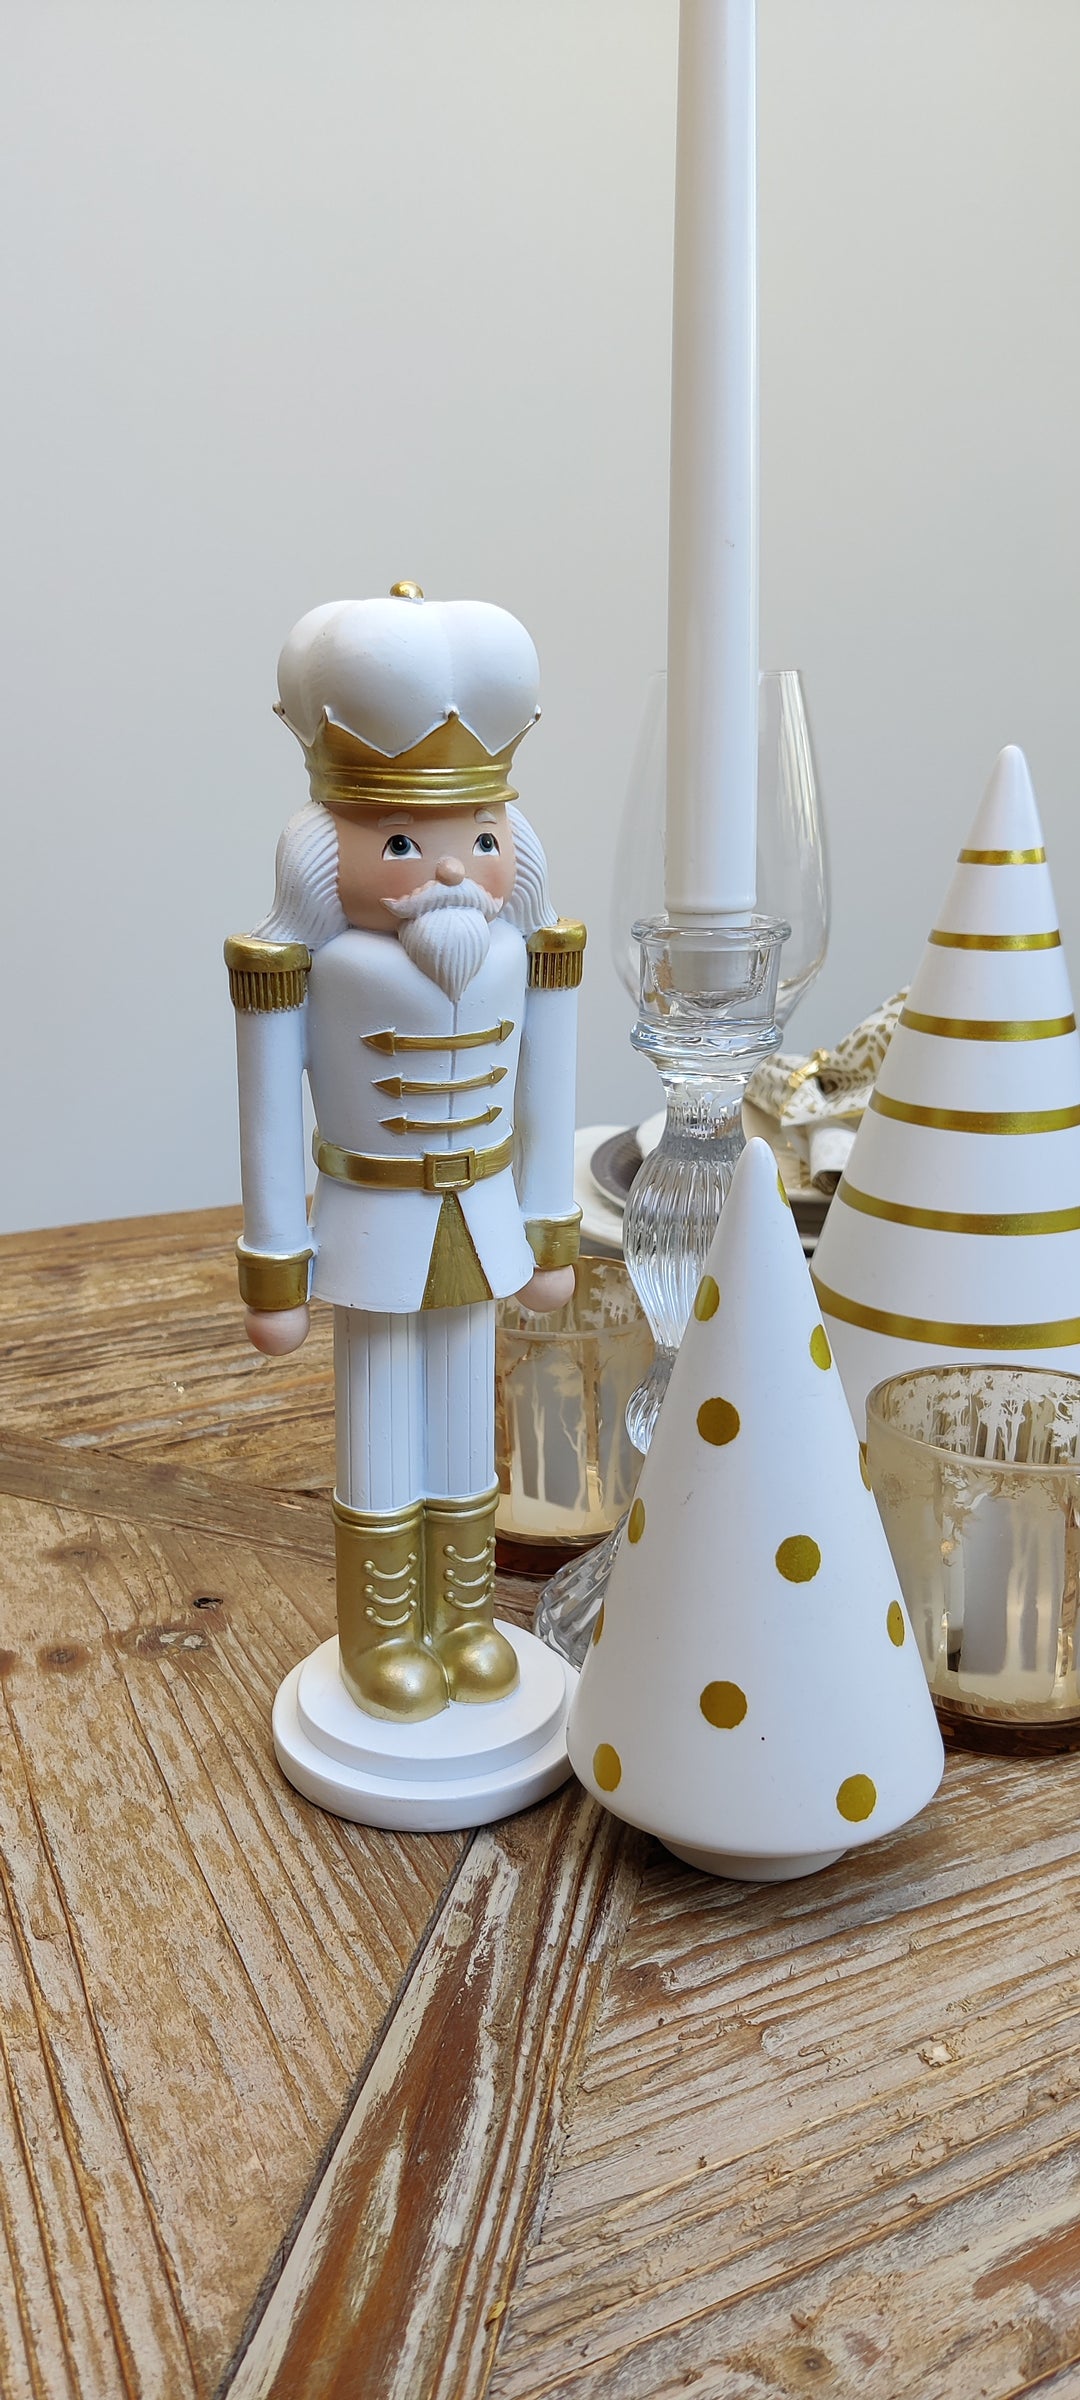 Medium Gold and White Ceramic Christmas Trees, Sold as a pair-Trees-LNH Edit